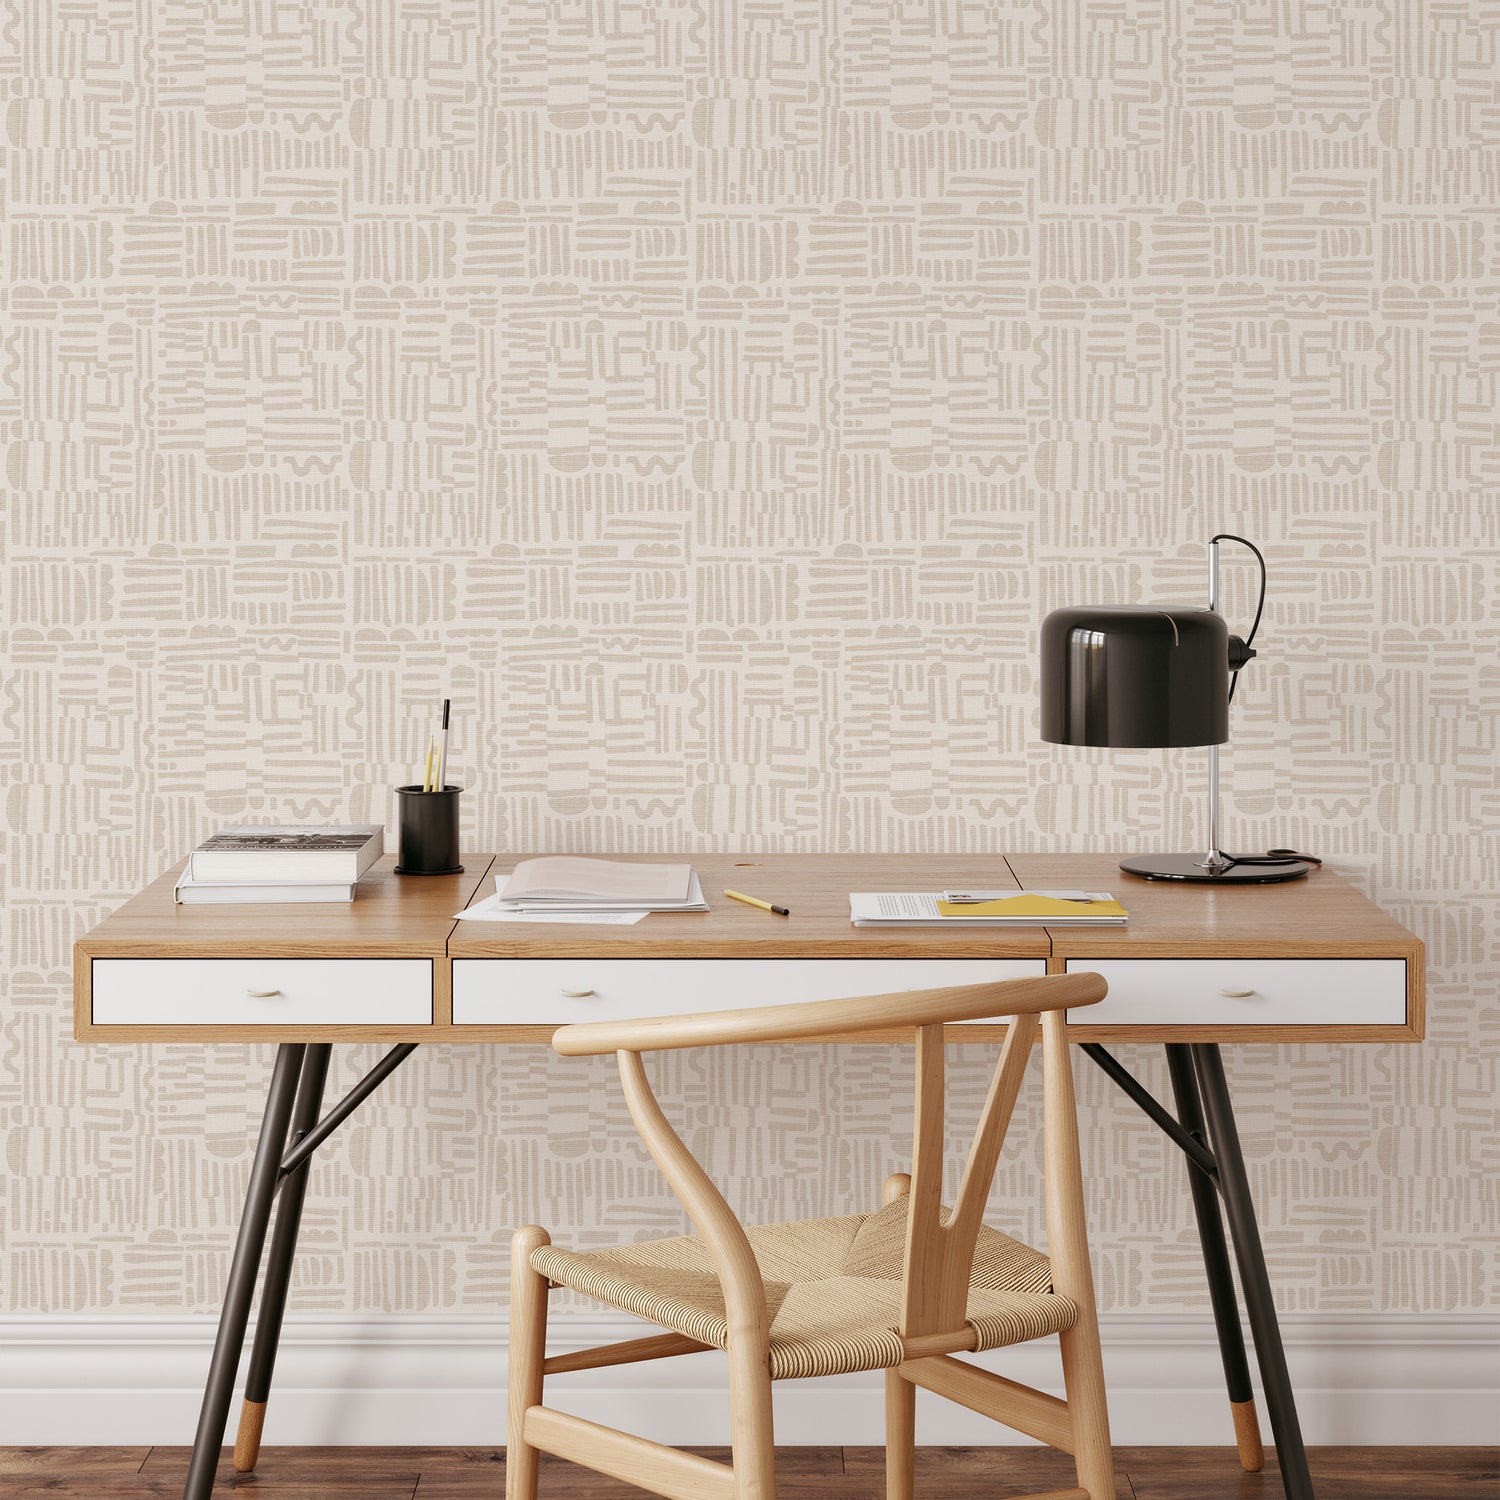 Introducing the statement wallpaper of your dreams, Geometric Lines Wallpaper - Bone on Cream. Feel the avant-garde artistry of this exclusive design as its funky lines add a delightful flair to your walls.